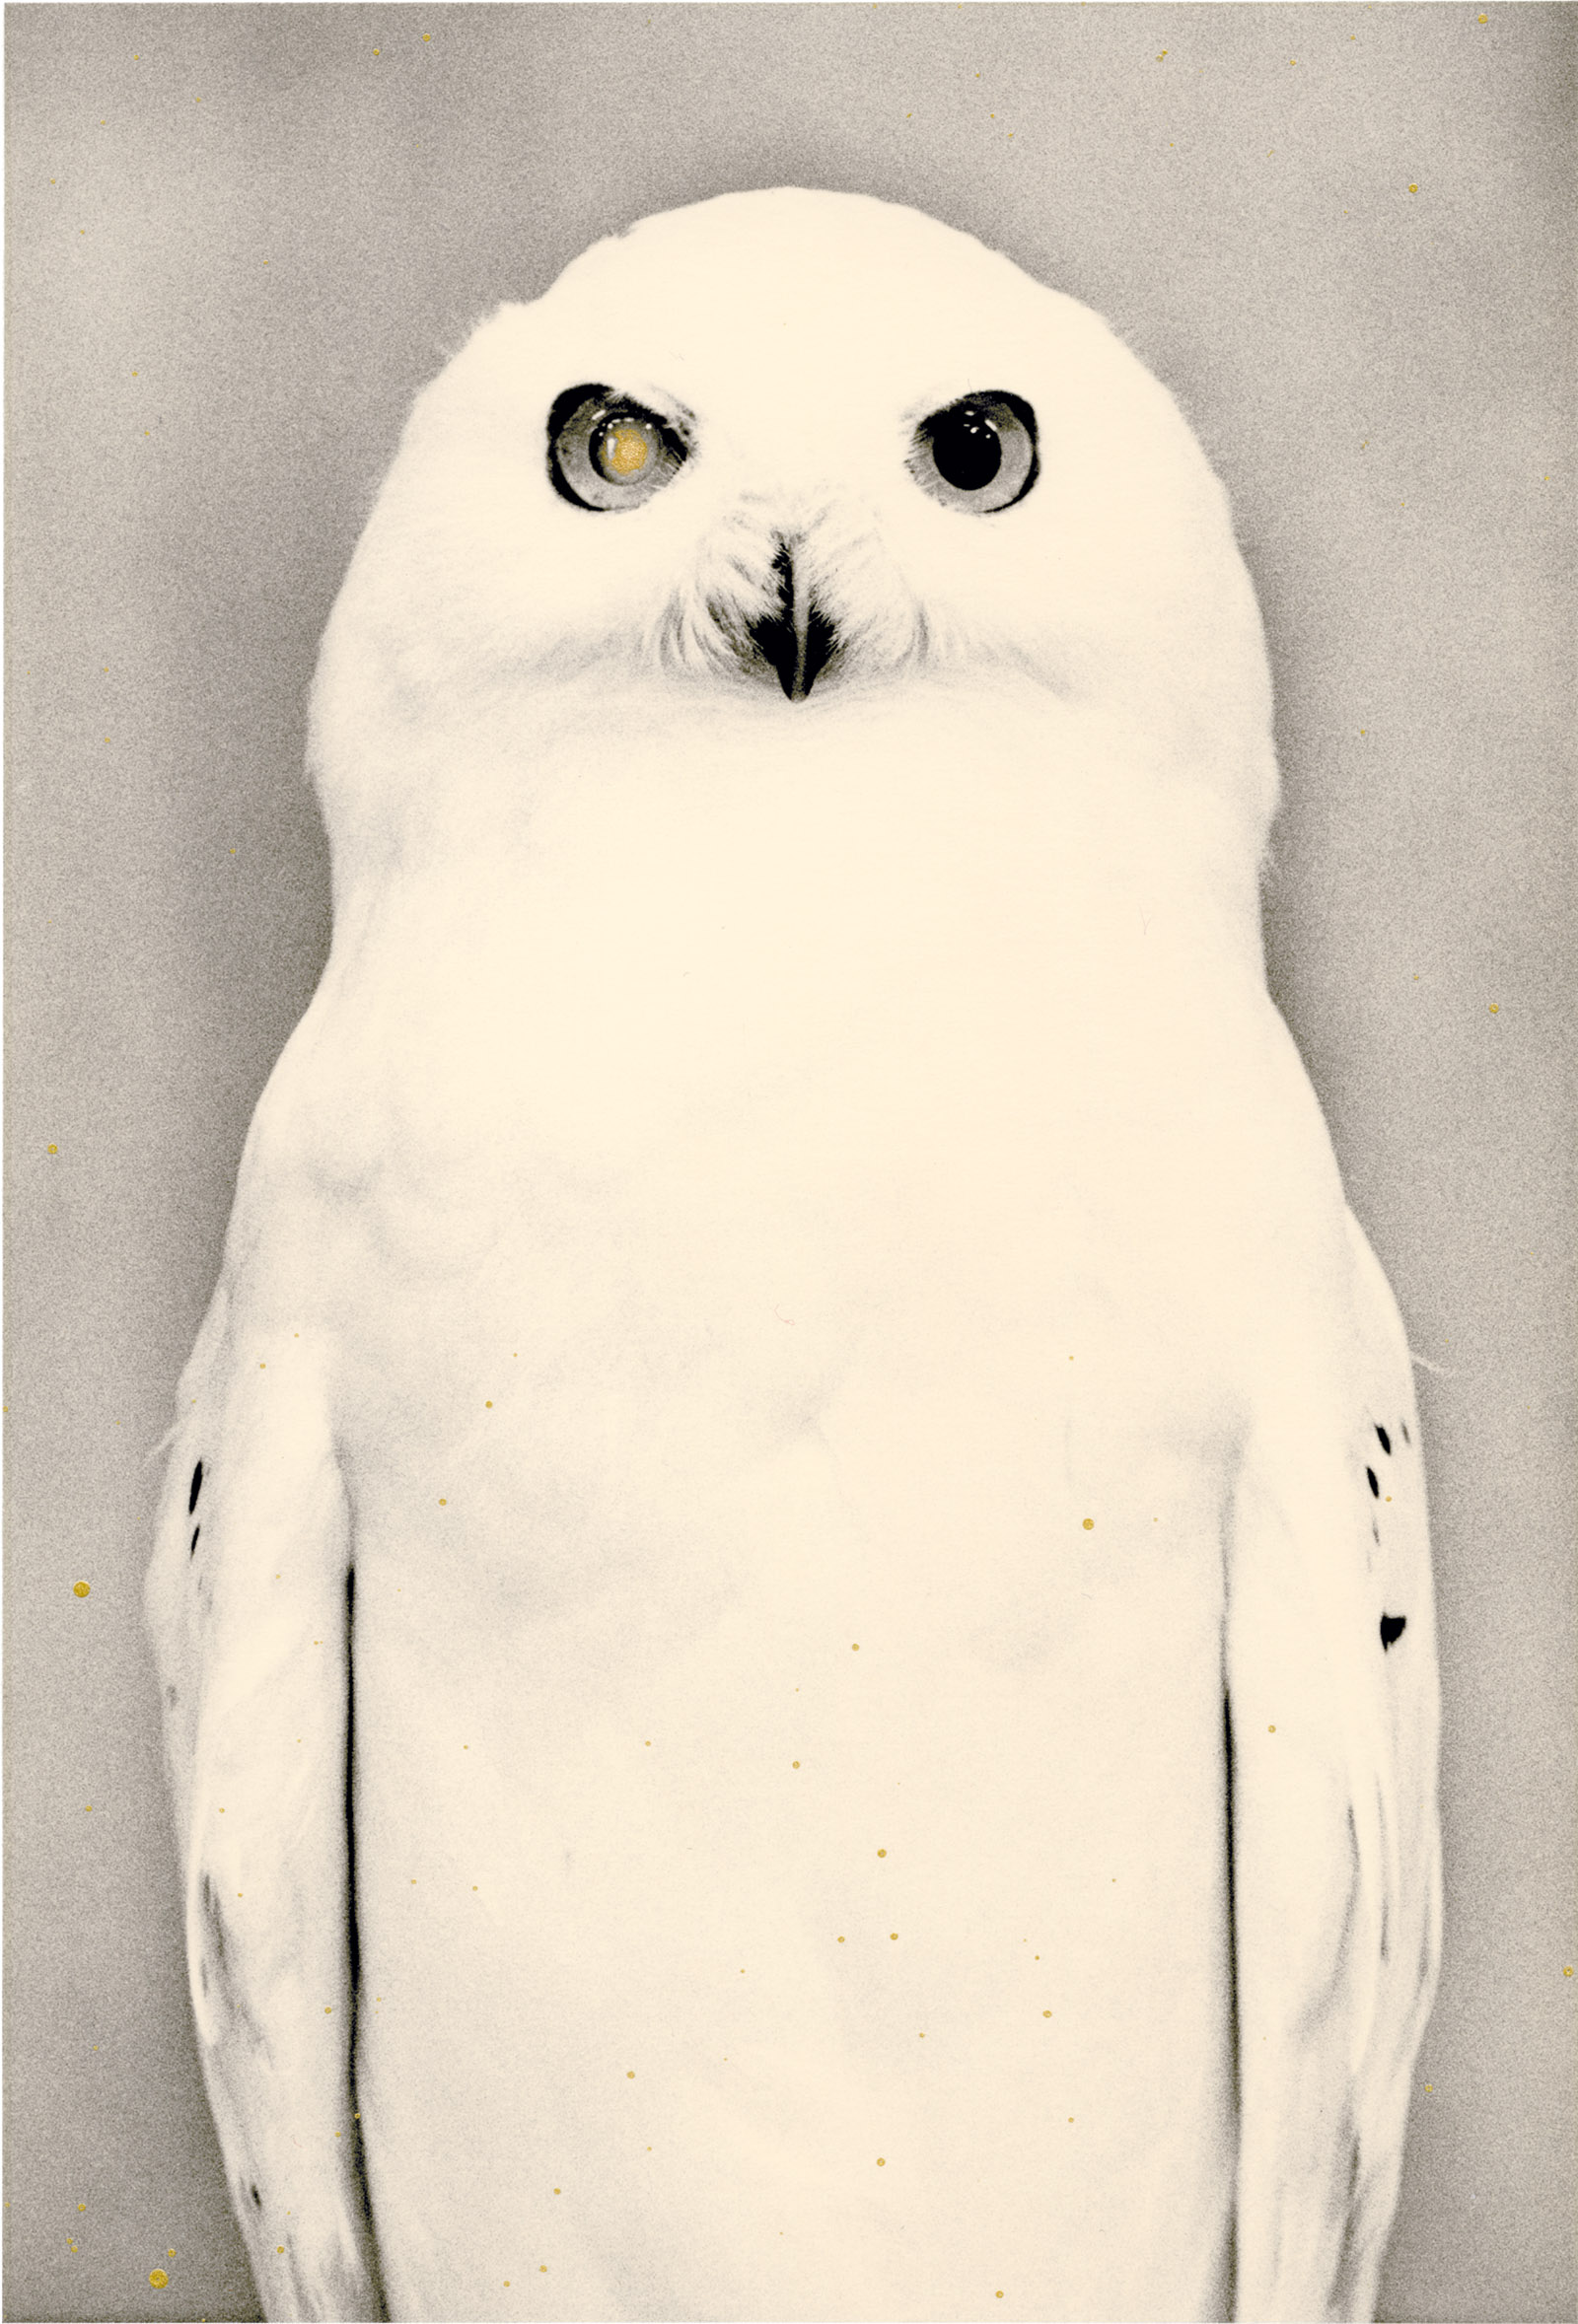 Snowy owl; photograph by Yamamoto Masao from his book Tori, which will be published by Radius in January 2017